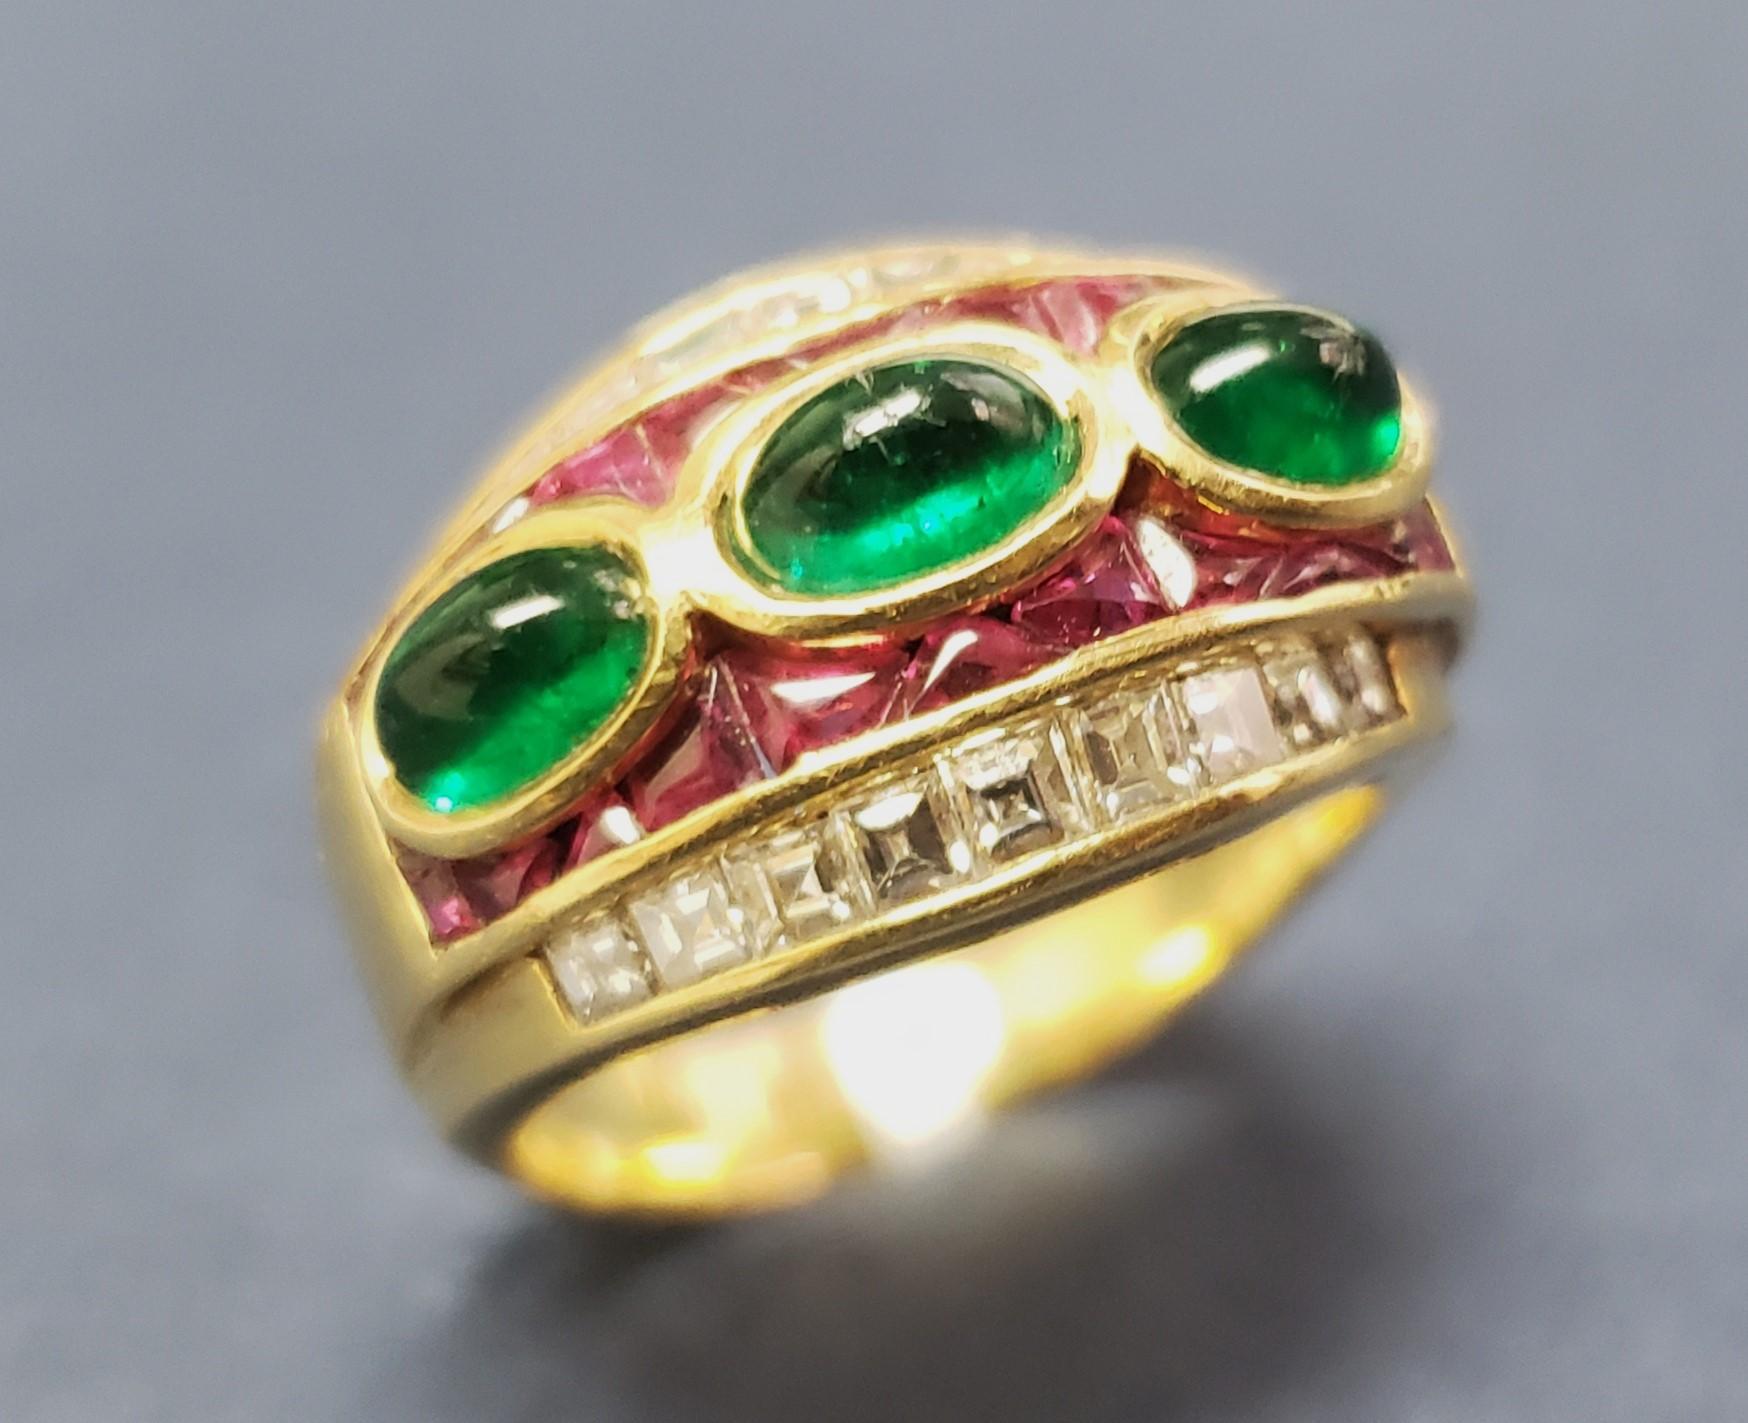 Vintage cocktail ring/anniversary band (most likely 1950's) channel set with 18 square step cut natural diamonds 0.92CT (F-G in color, VS in clarity, beautiful sparkly stones). Ring bezel set with 3 oval cabochon cut natural emeralds 1.58CT total